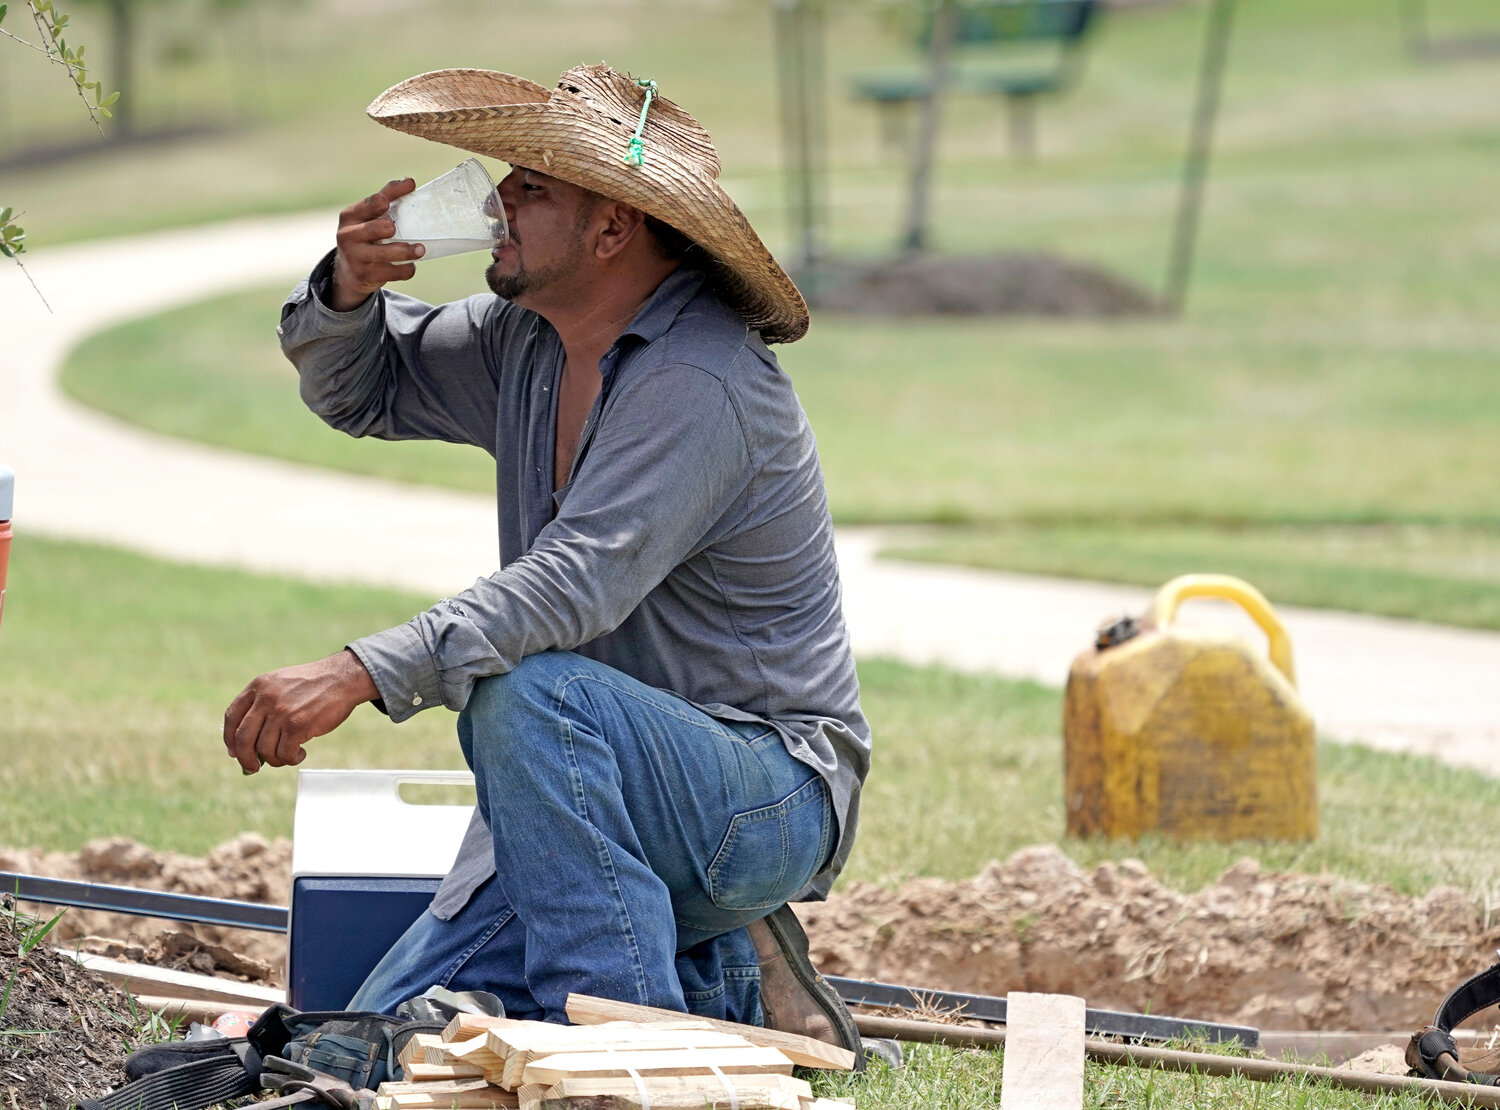 Construction worker Ramiro Montez took a break from working in the Houston heat in July 2018. While unrelenting heat set in across Texas this summer, opponents of a sweeping new law targeting local regulations took to the airwaves and internet with an alarming message: outdoor workers would be banned from taking water breaks.